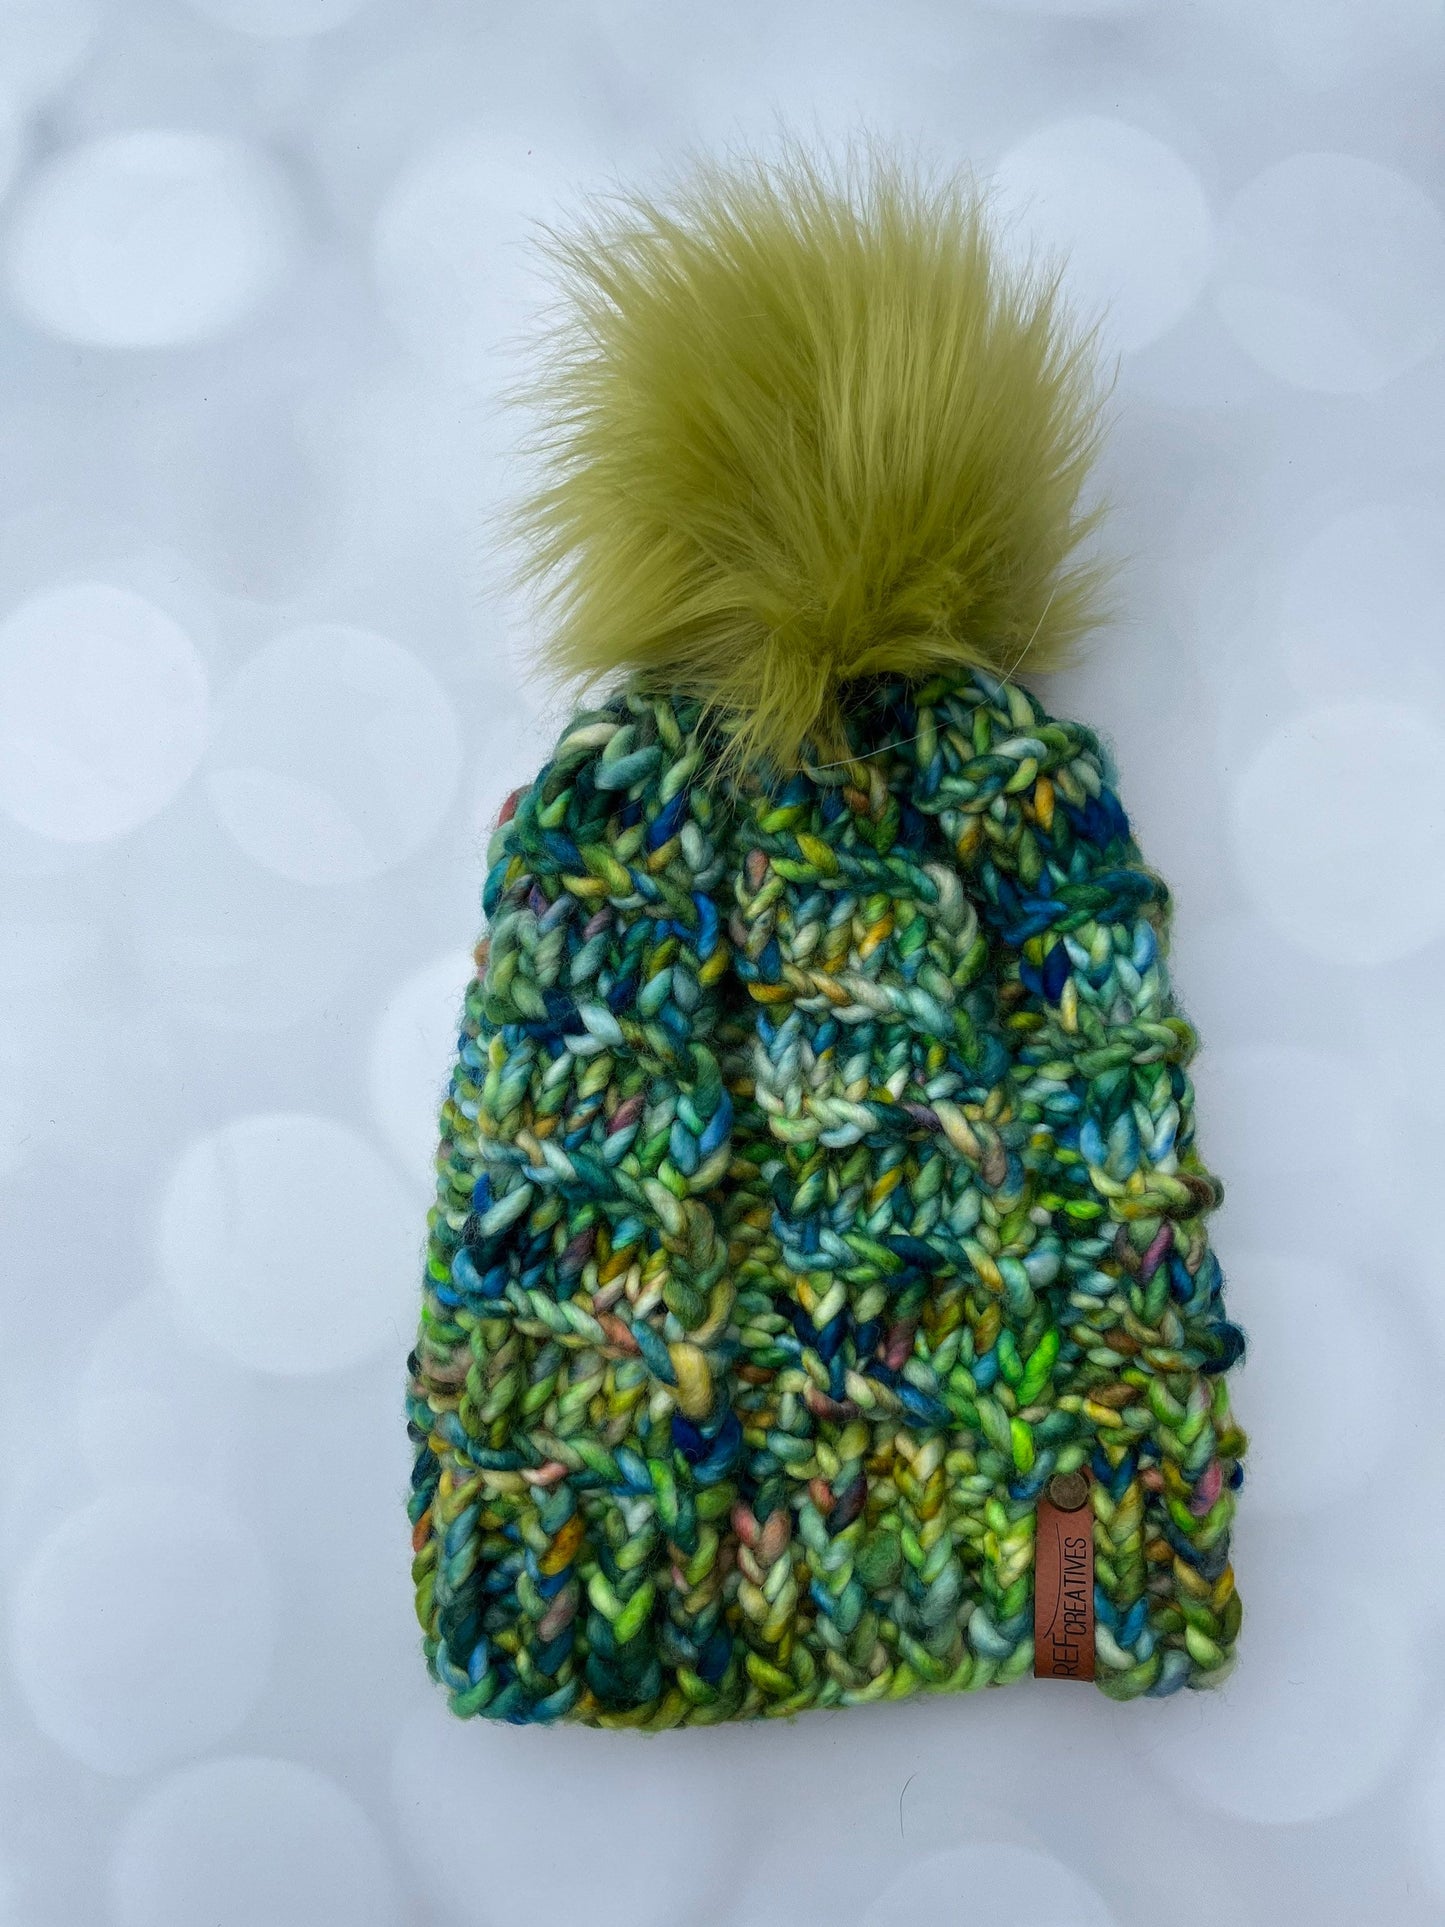 Botanical Climbing Ivy Hand Knit Hat with Hand Dyed Yarn